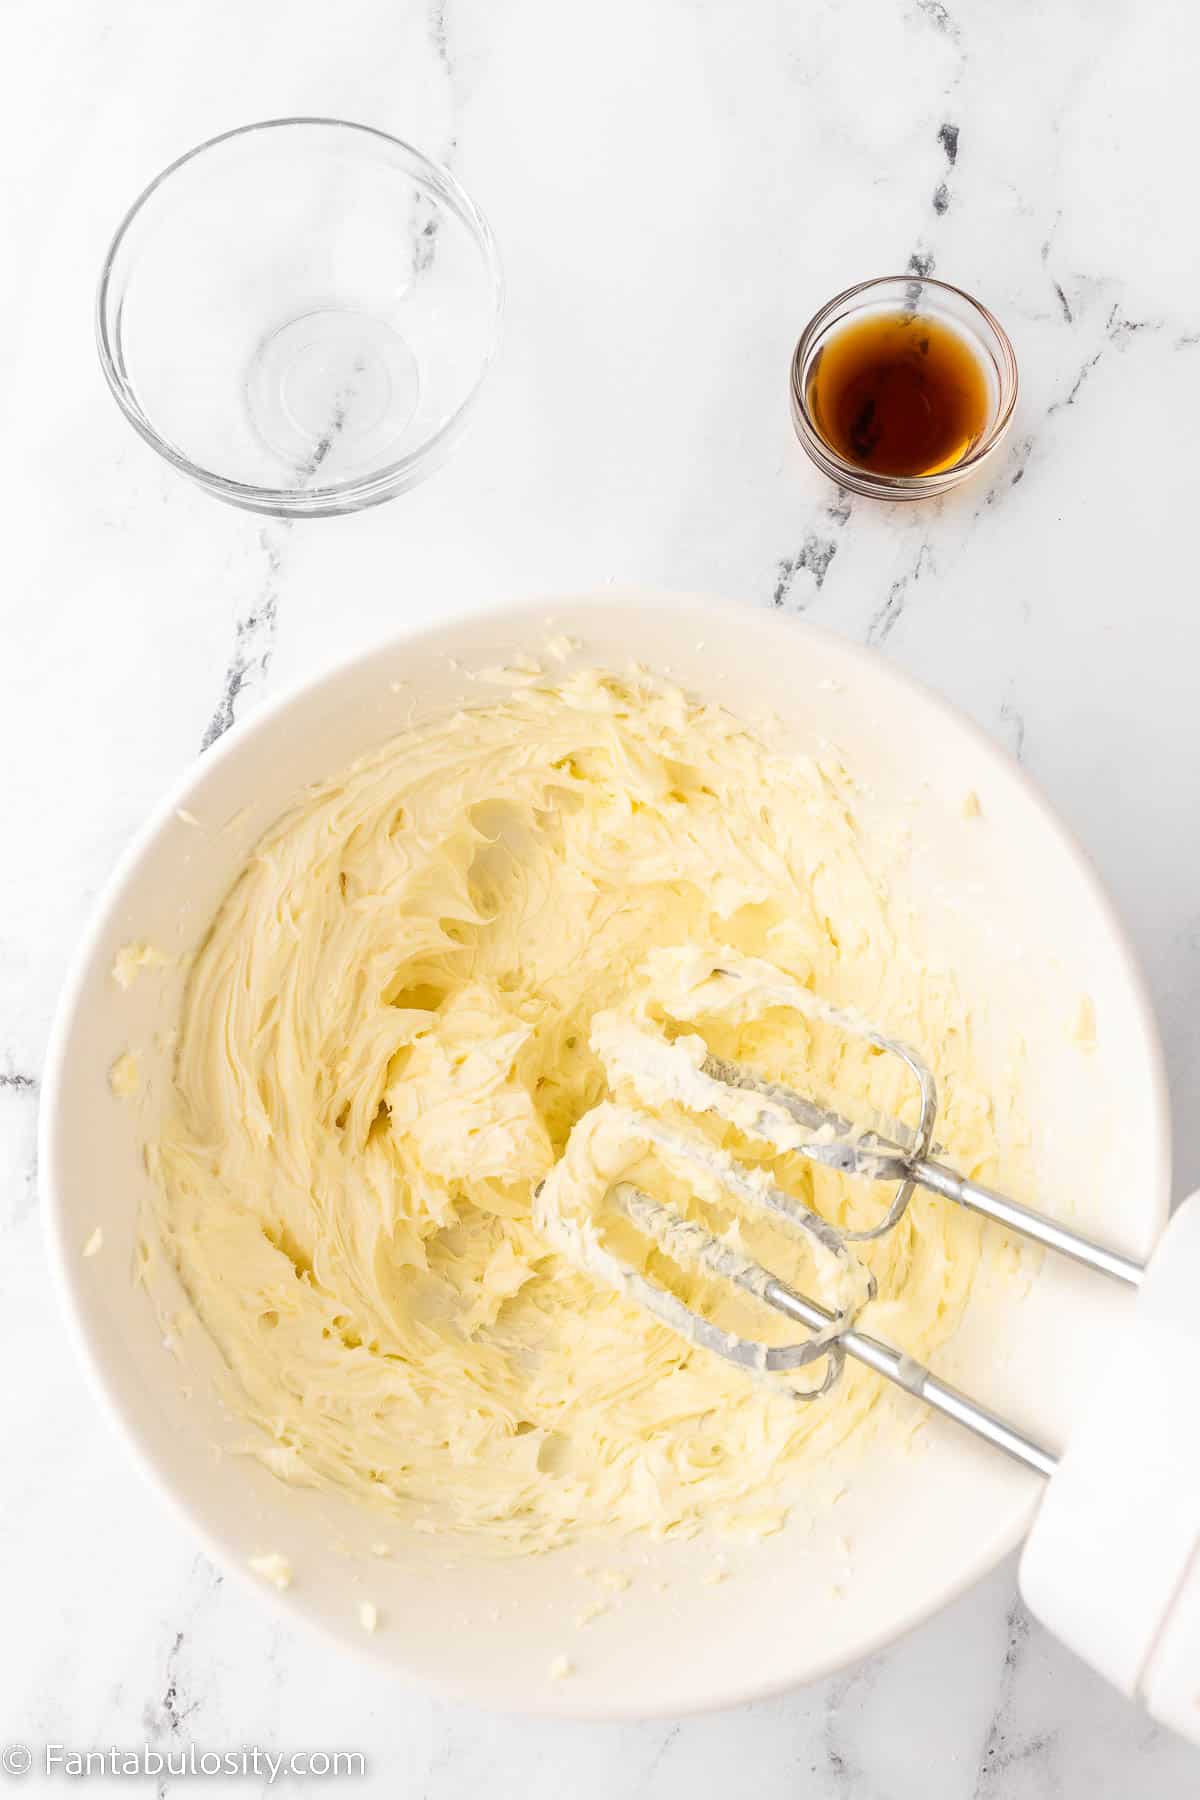 Two sticks of butter, vanilla extract and powdered sugar have been mixed with a hand mixer in a large mixing bowl until they are fluffy and light yellow